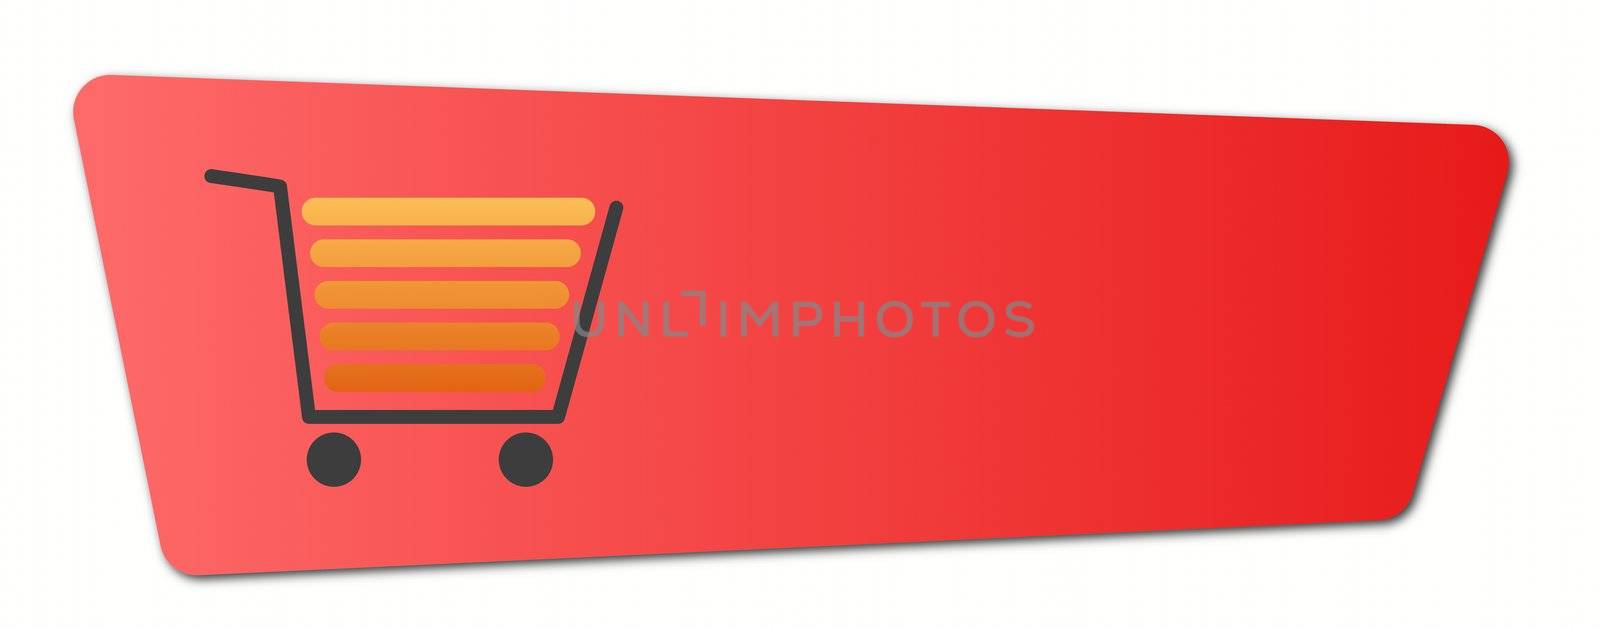 Buy now button with a shopping cart on white background.